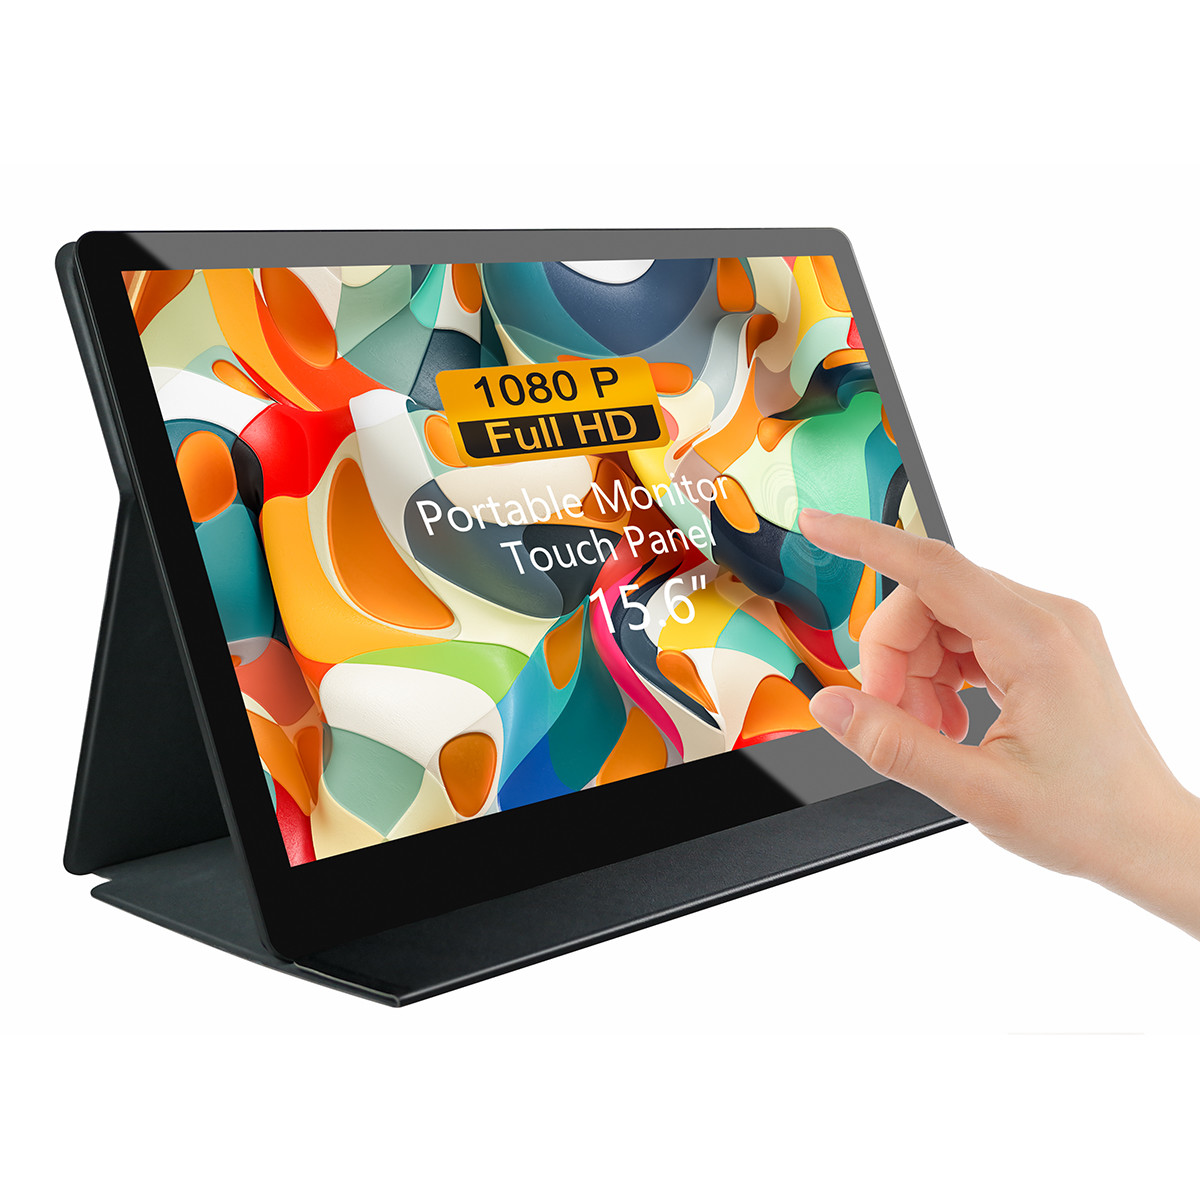 16:9 Aspect Ratio Weight 720g 15.6&quot; USB Touchscreen Portable Monitor